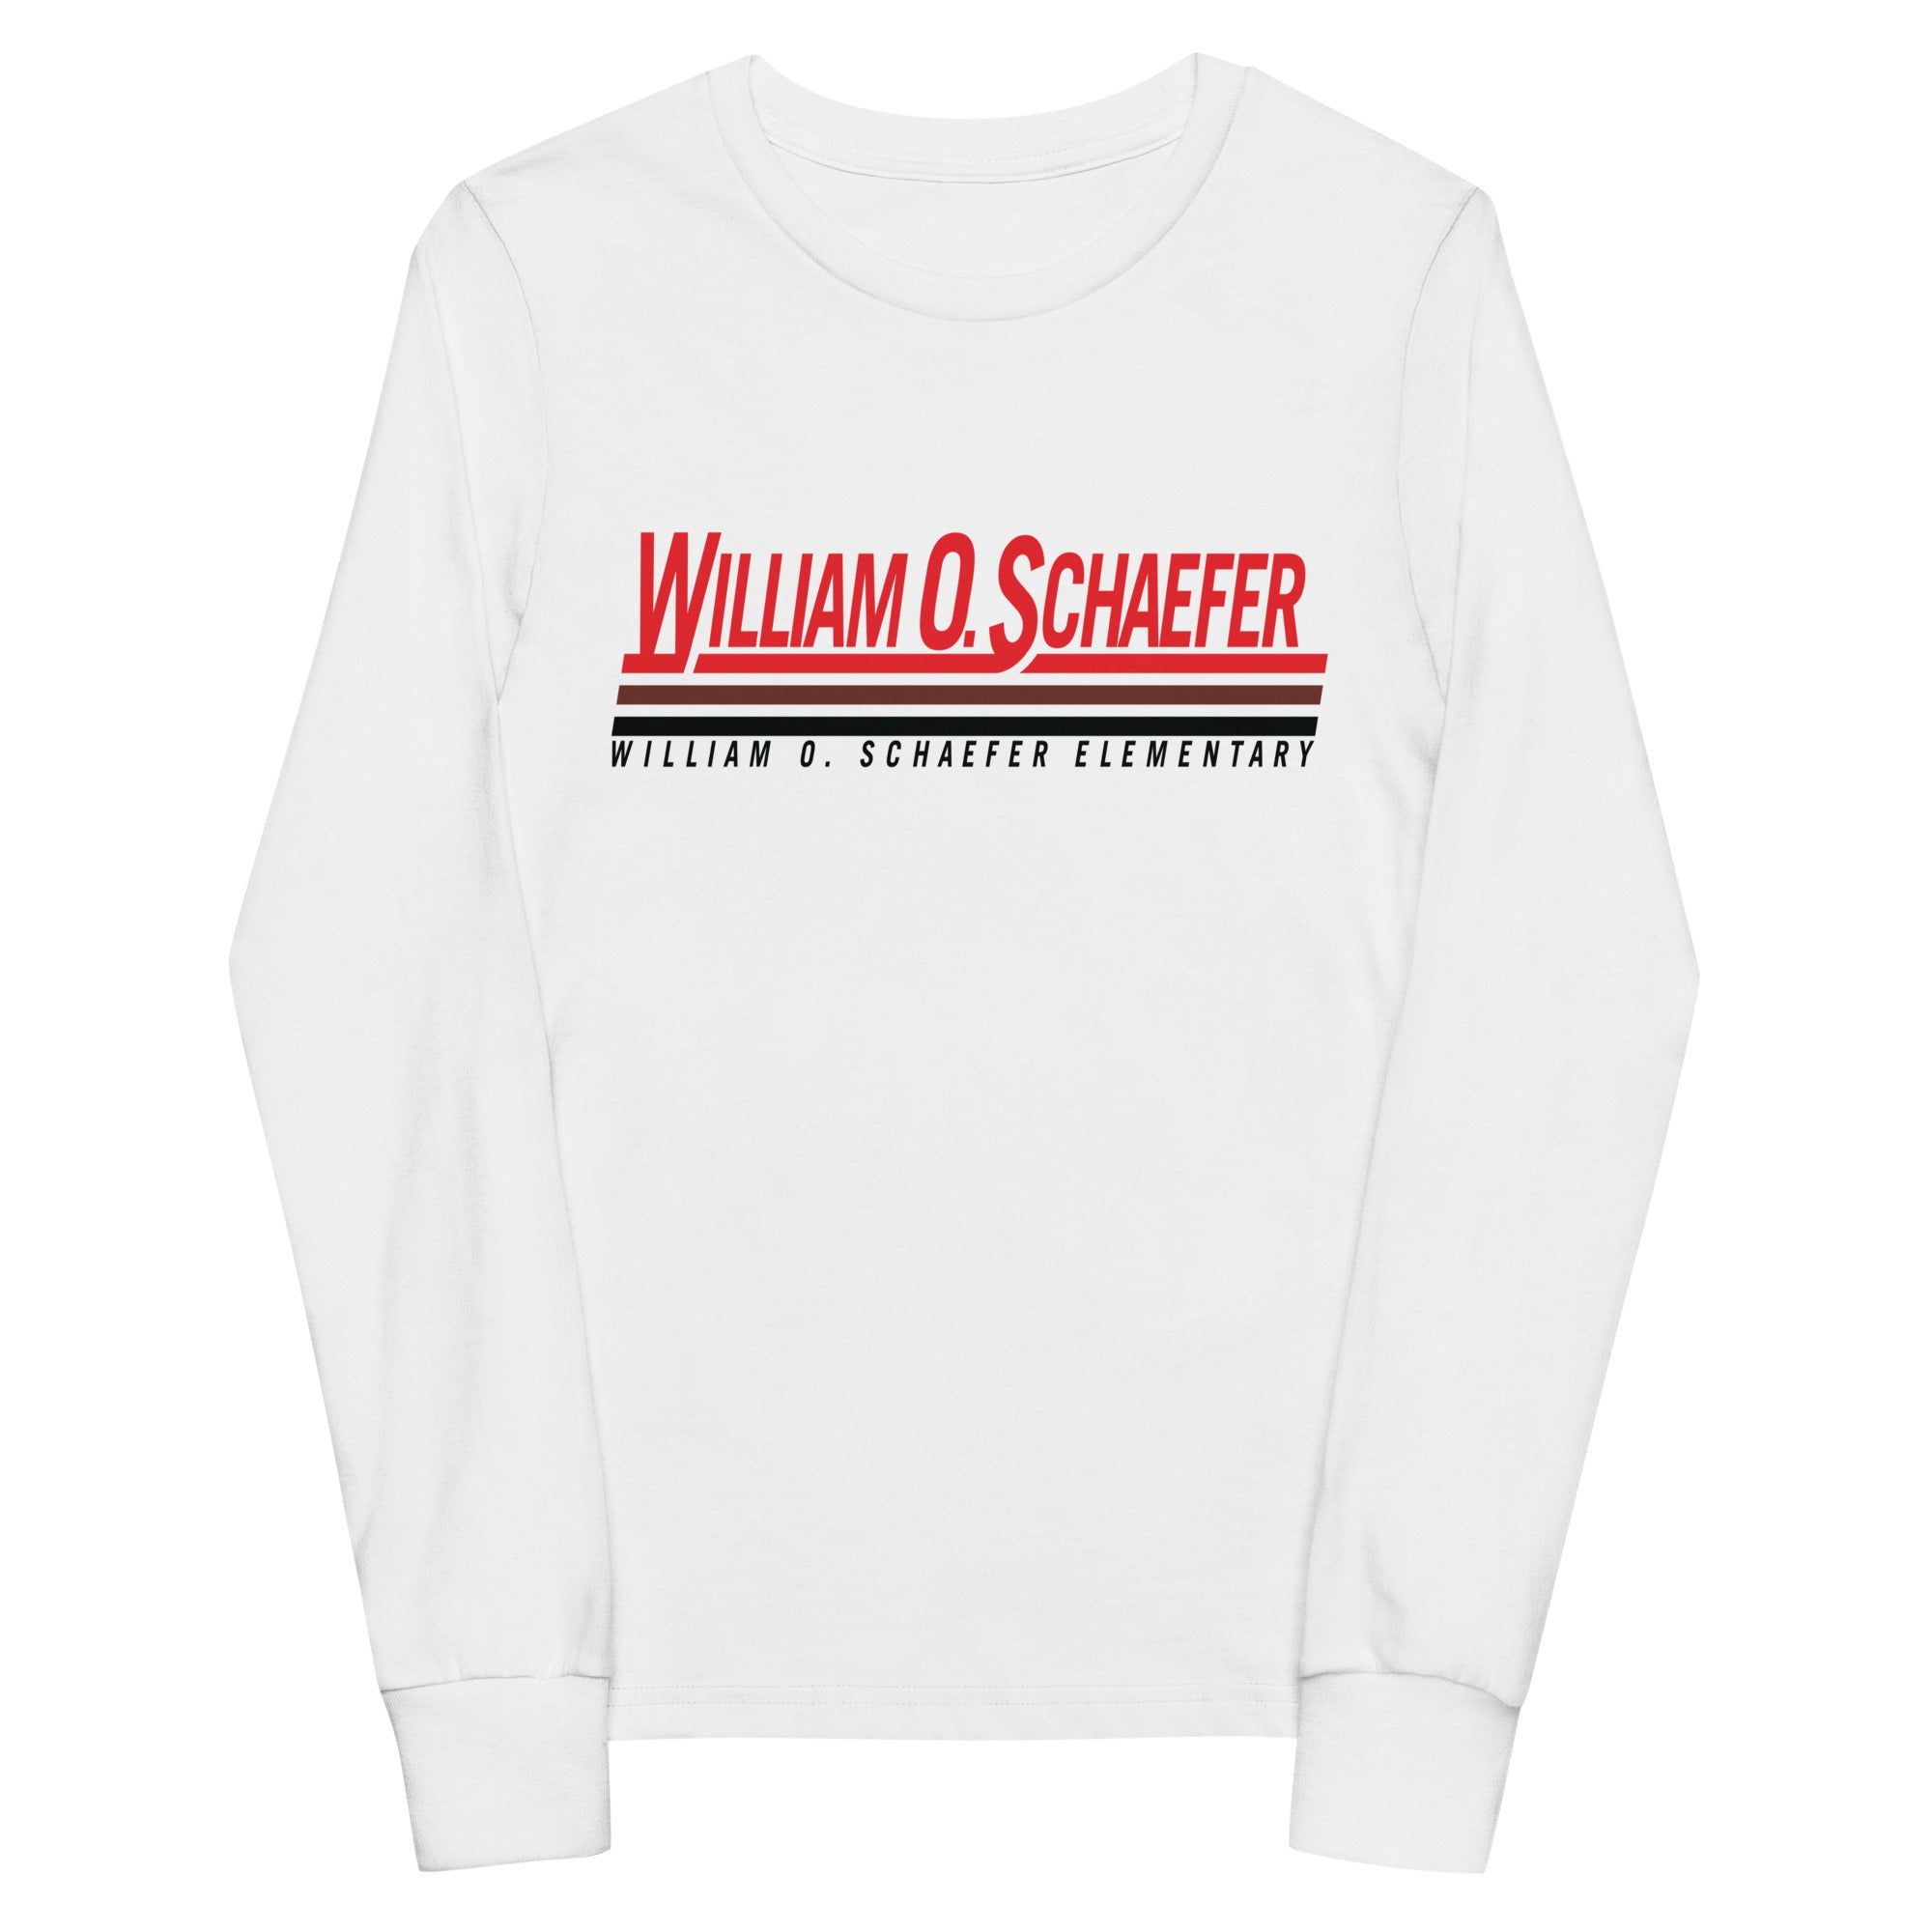 William O. Schaefer Elementary Youth long sleeve tee